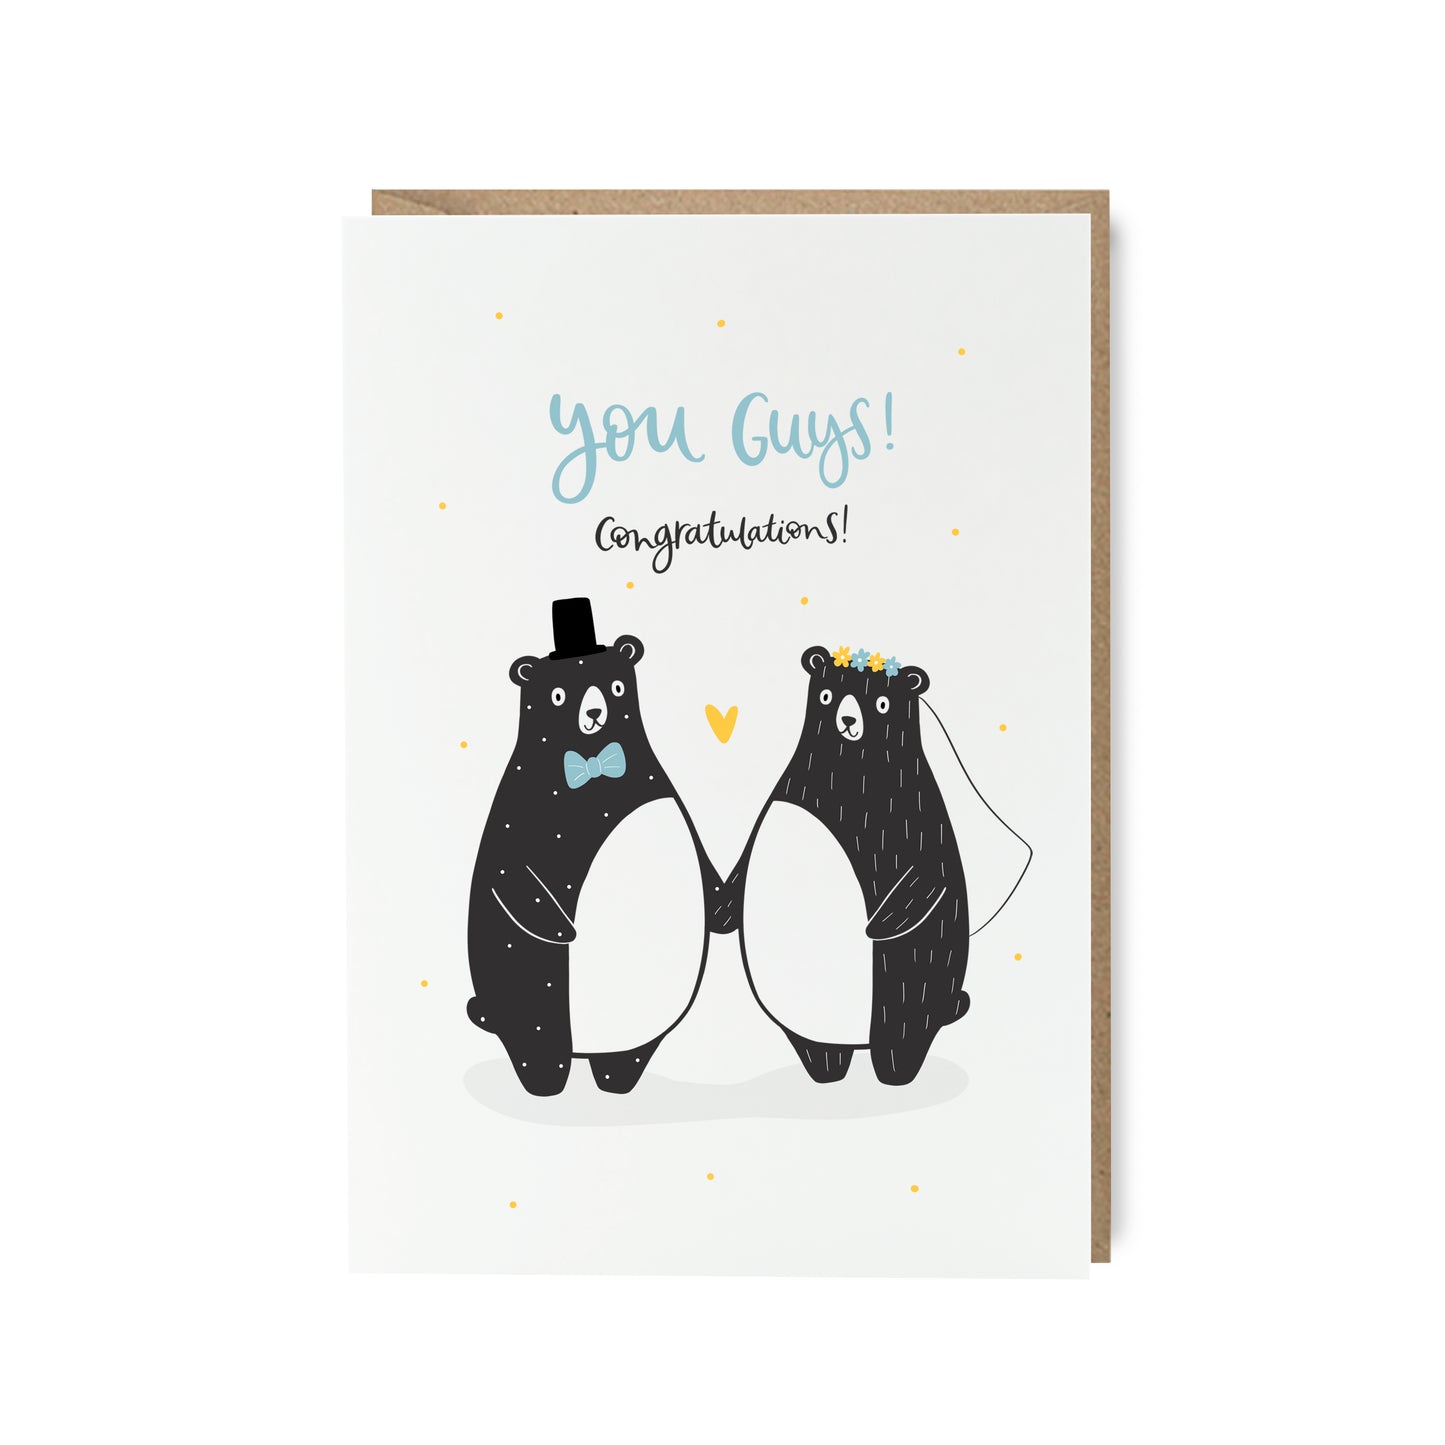 Mr and Mrs Bear wedding engagement card by Abbie Imagine